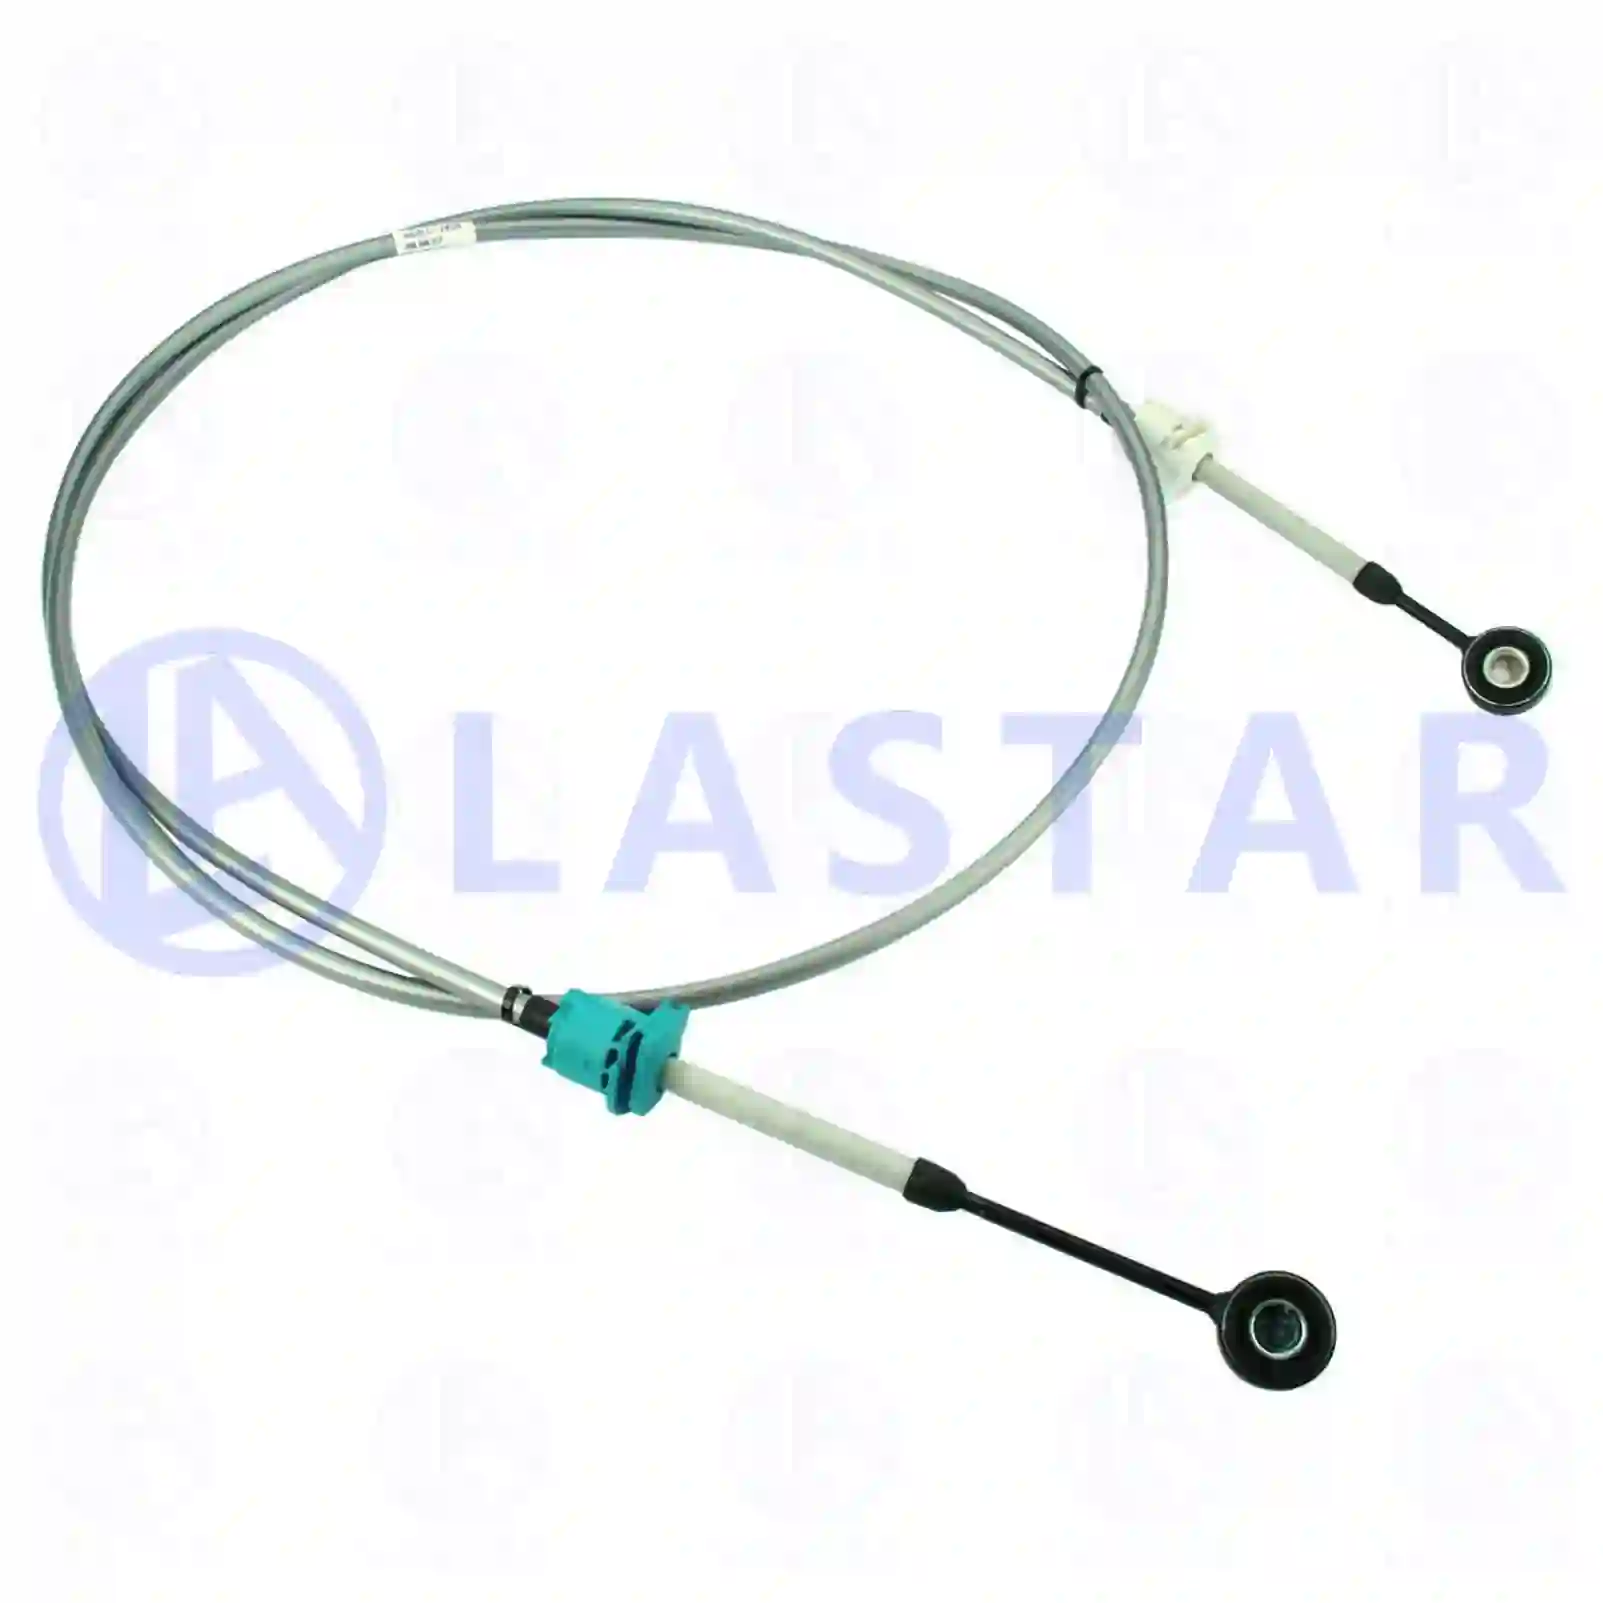 Control cable, switching, 77732413, 20545963, 20700963, 21002863, 21343563, 21789681 ||  77732413 Lastar Spare Part | Truck Spare Parts, Auotomotive Spare Parts Control cable, switching, 77732413, 20545963, 20700963, 21002863, 21343563, 21789681 ||  77732413 Lastar Spare Part | Truck Spare Parts, Auotomotive Spare Parts